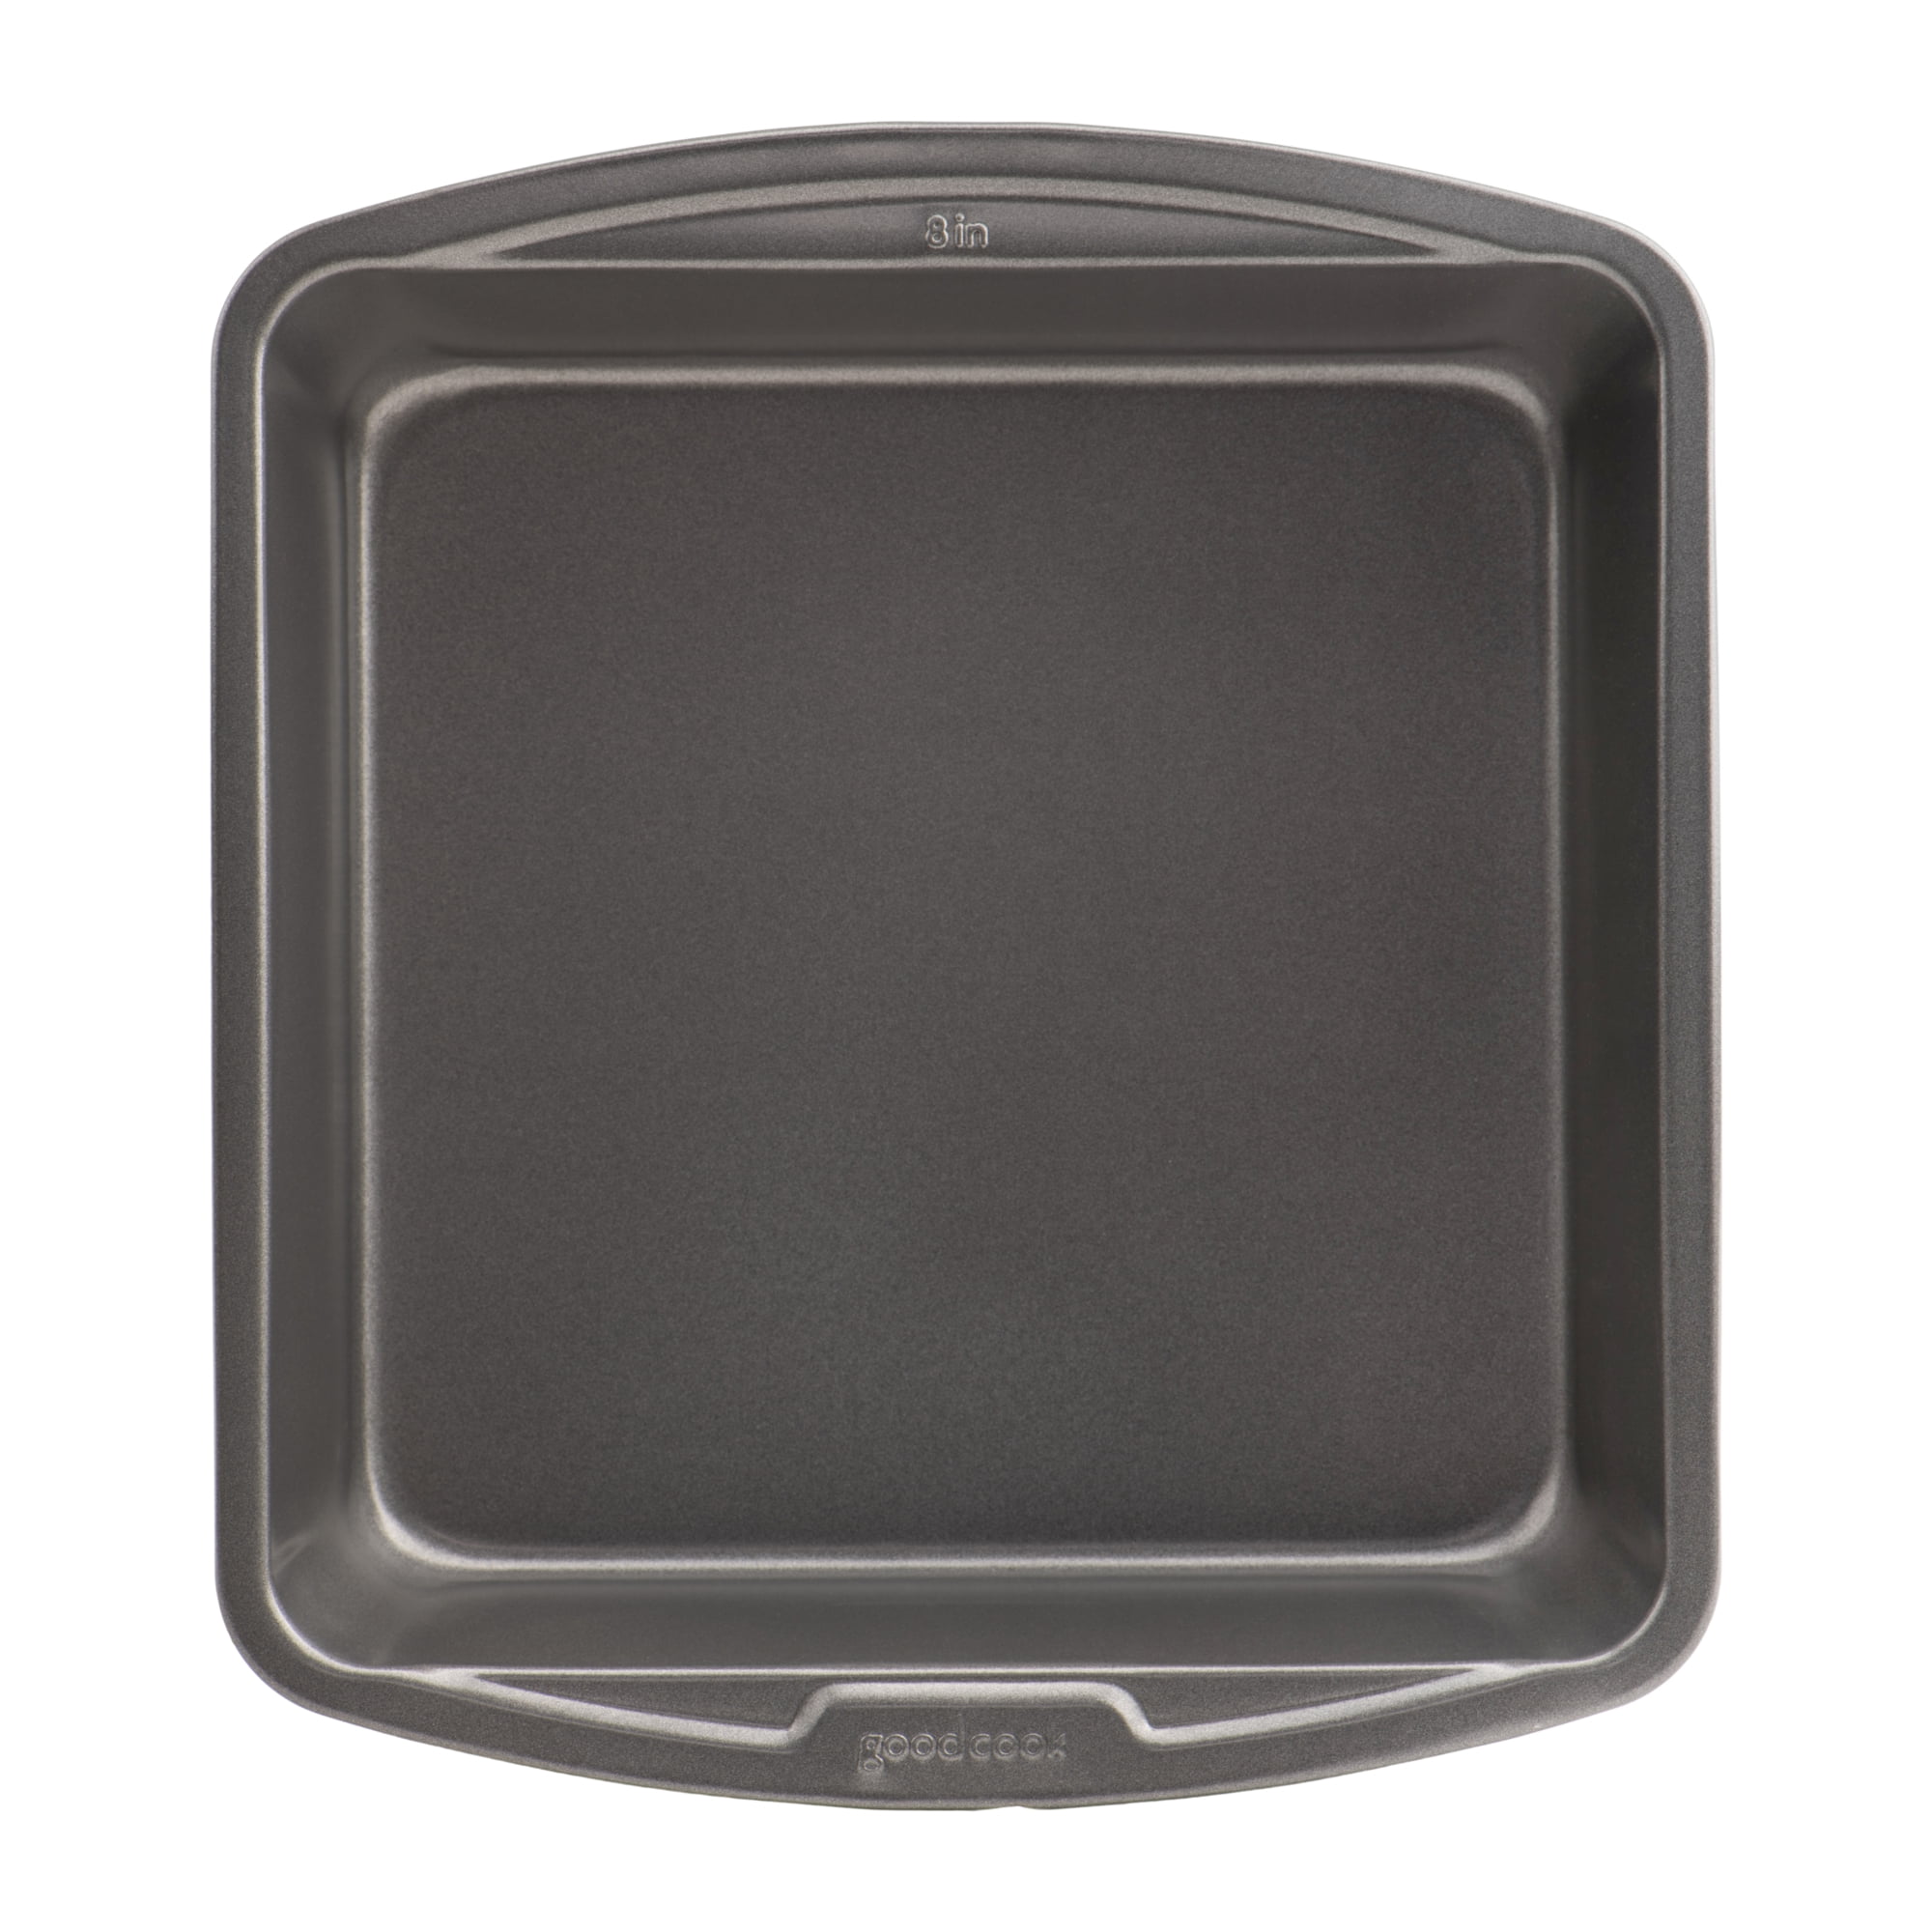 GOOD COOK NS CAKE PAN SQ 8 by 8